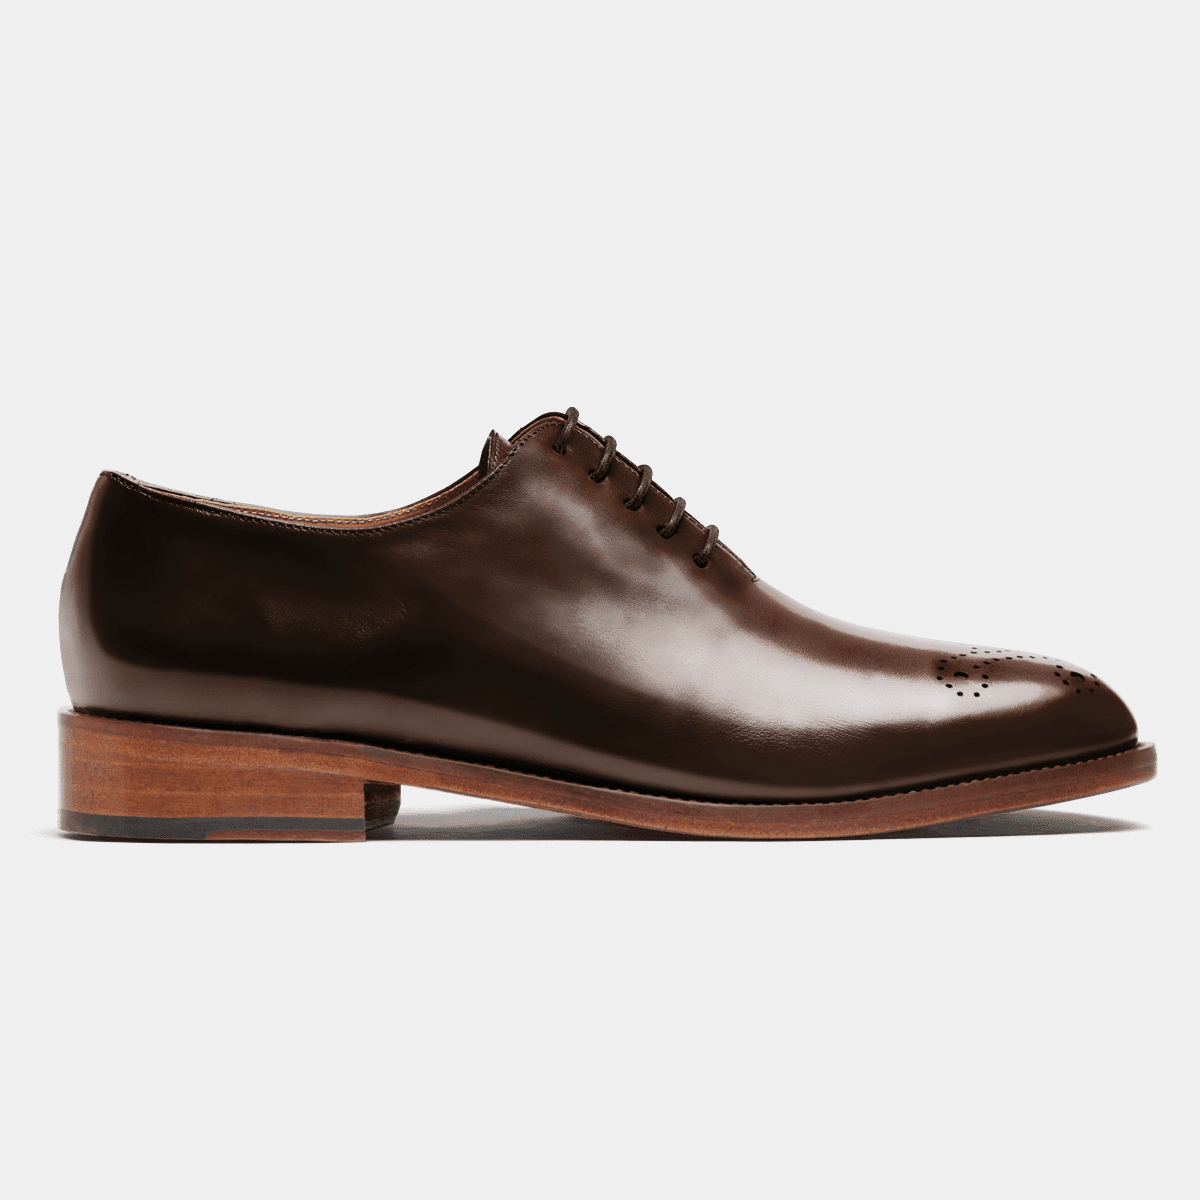 Wholecut Oxford shoes - brown flora leather